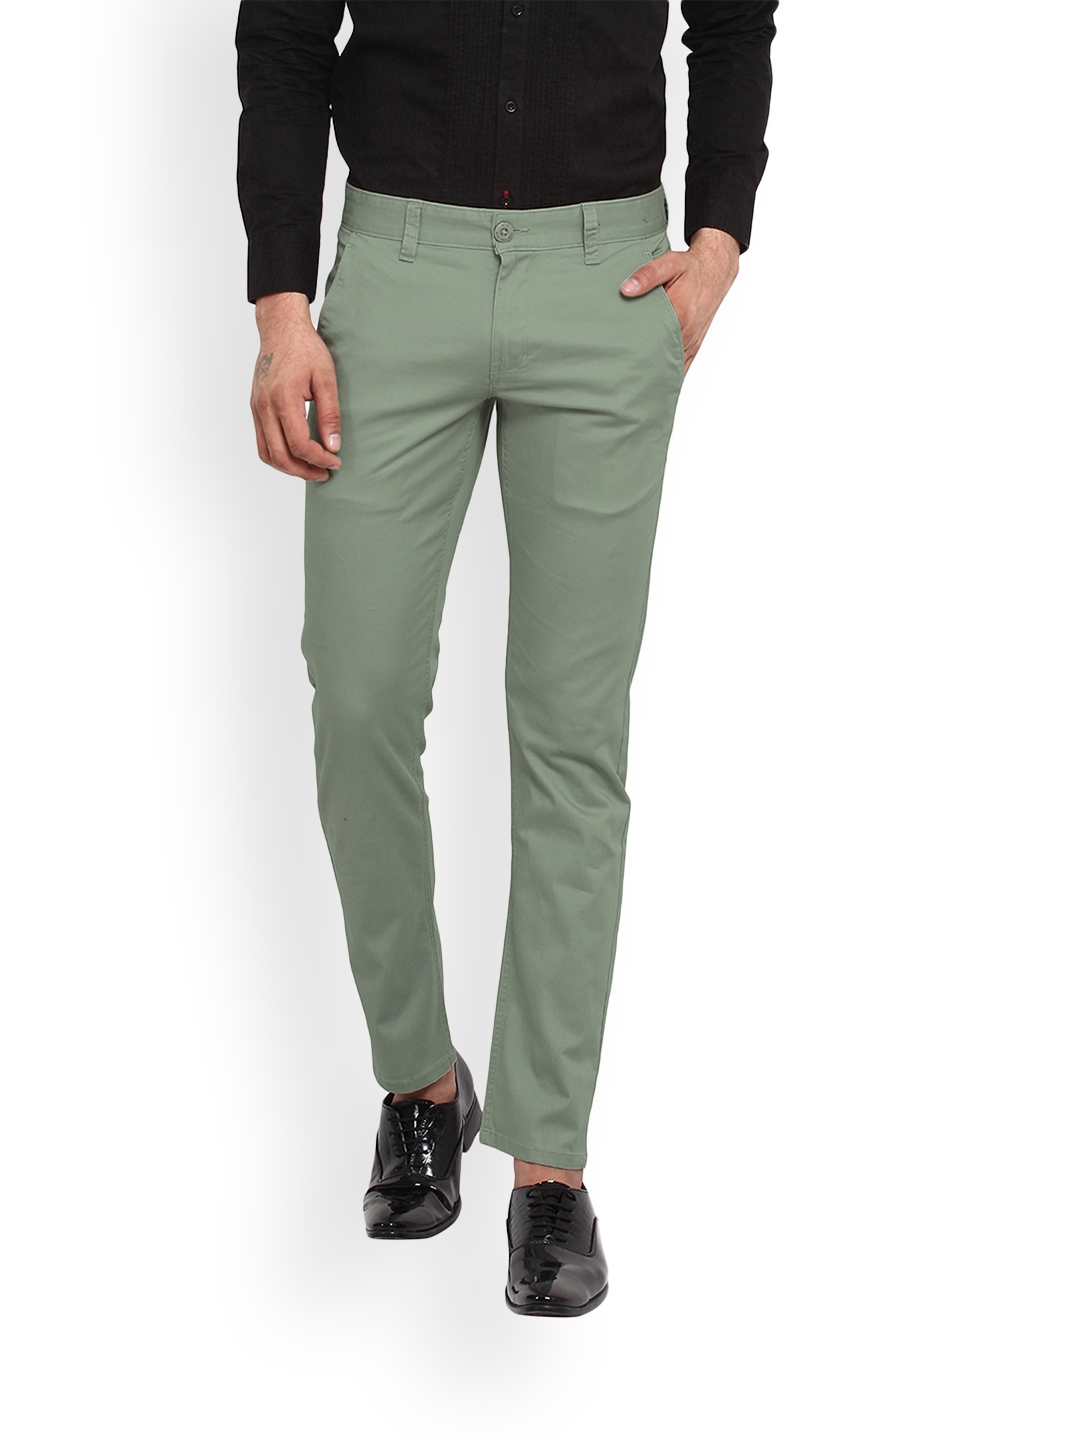 Buy Wear Your Mind Men Olive Green Slim Fit Solid Chinos